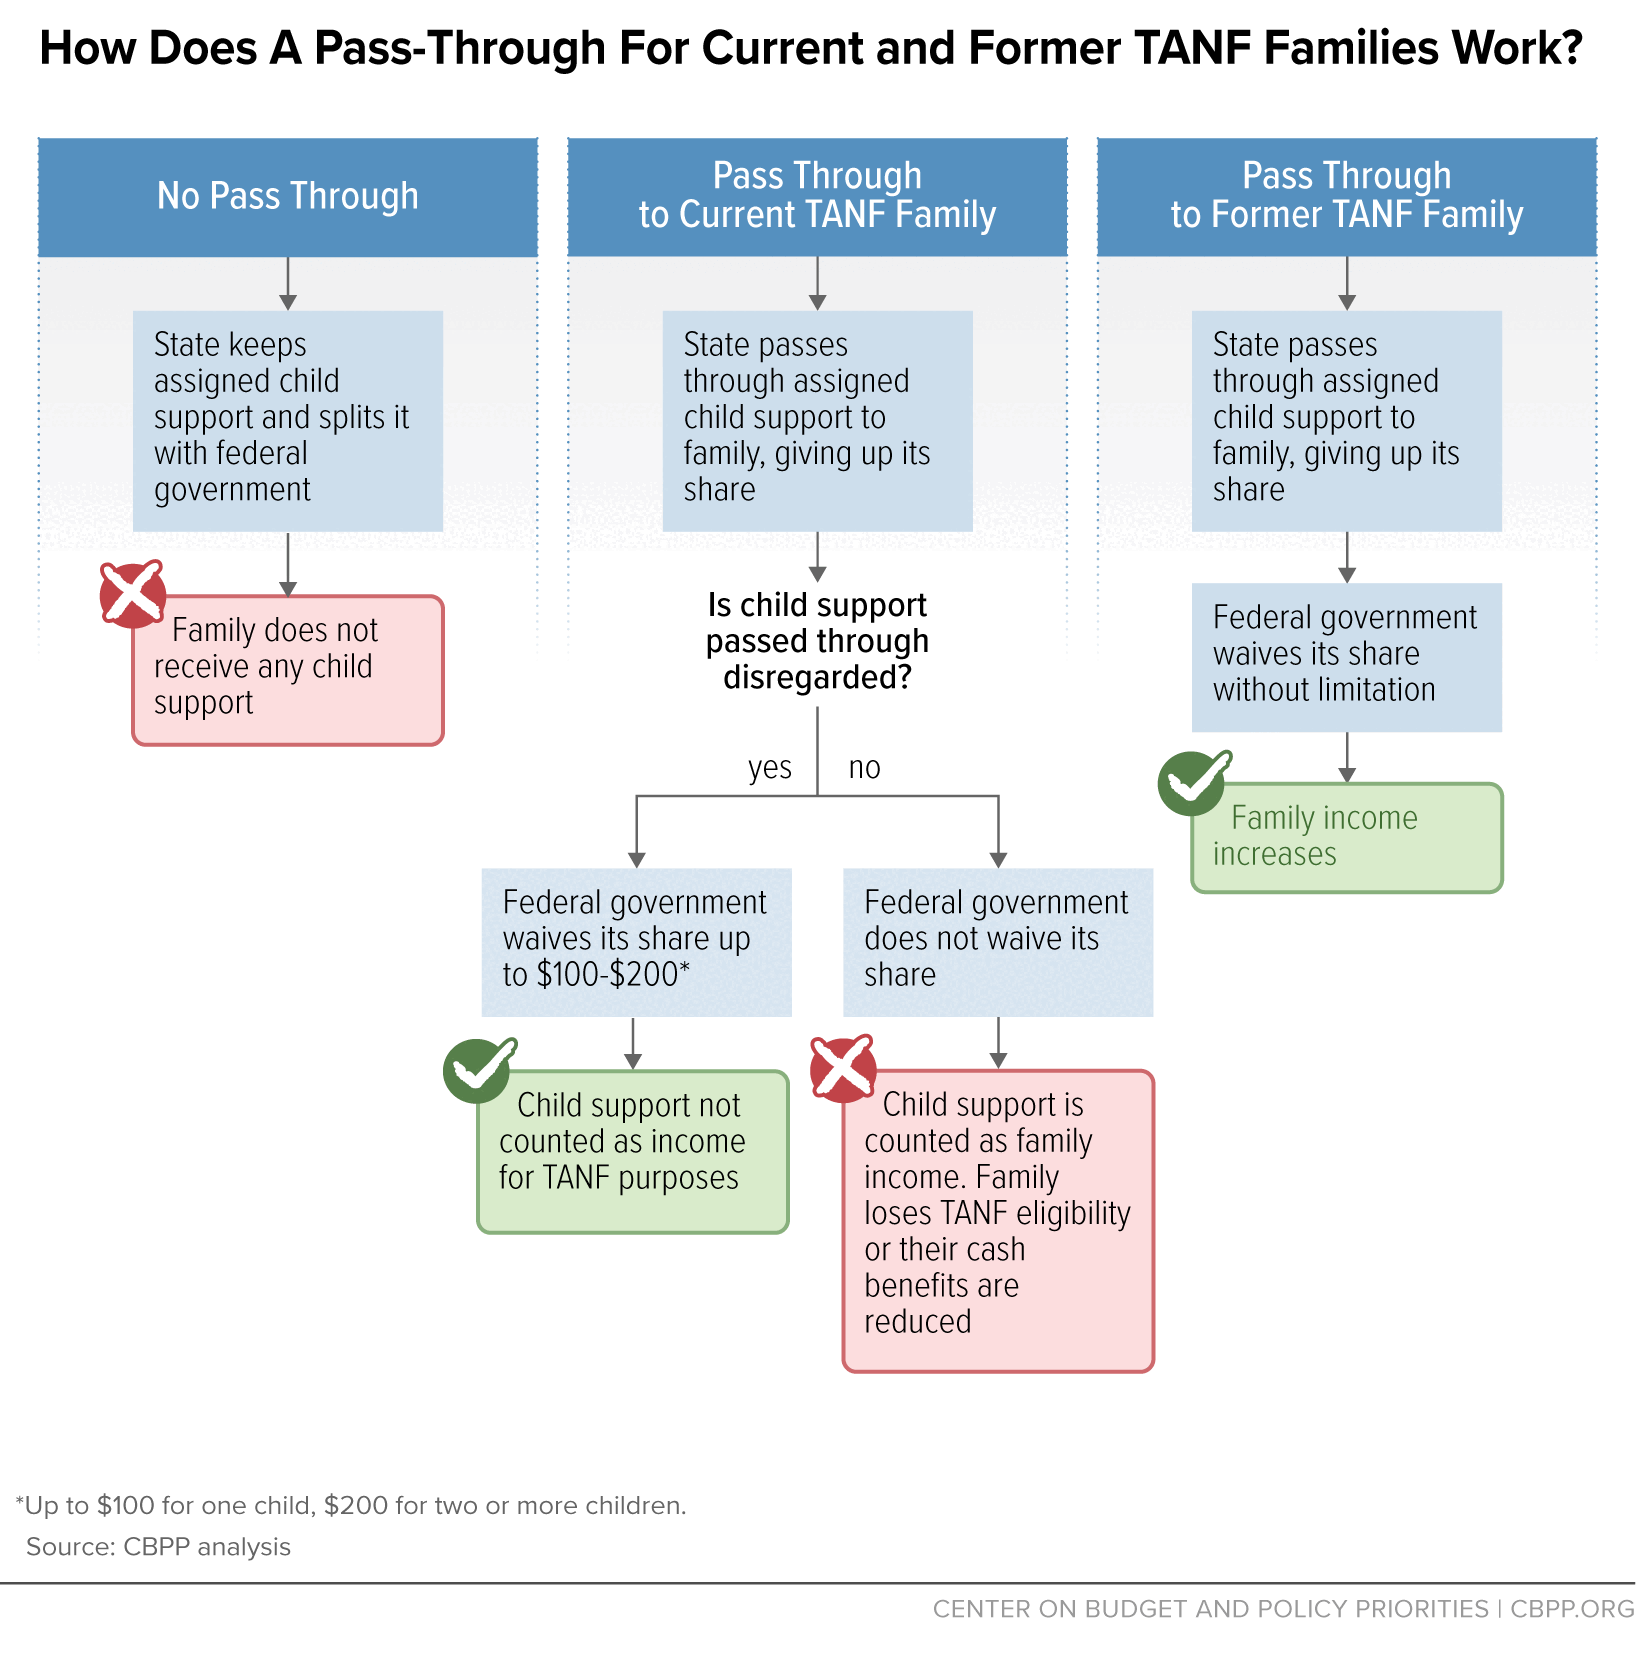 How Does A Pass-Through For Current and Former TANF Families Work?